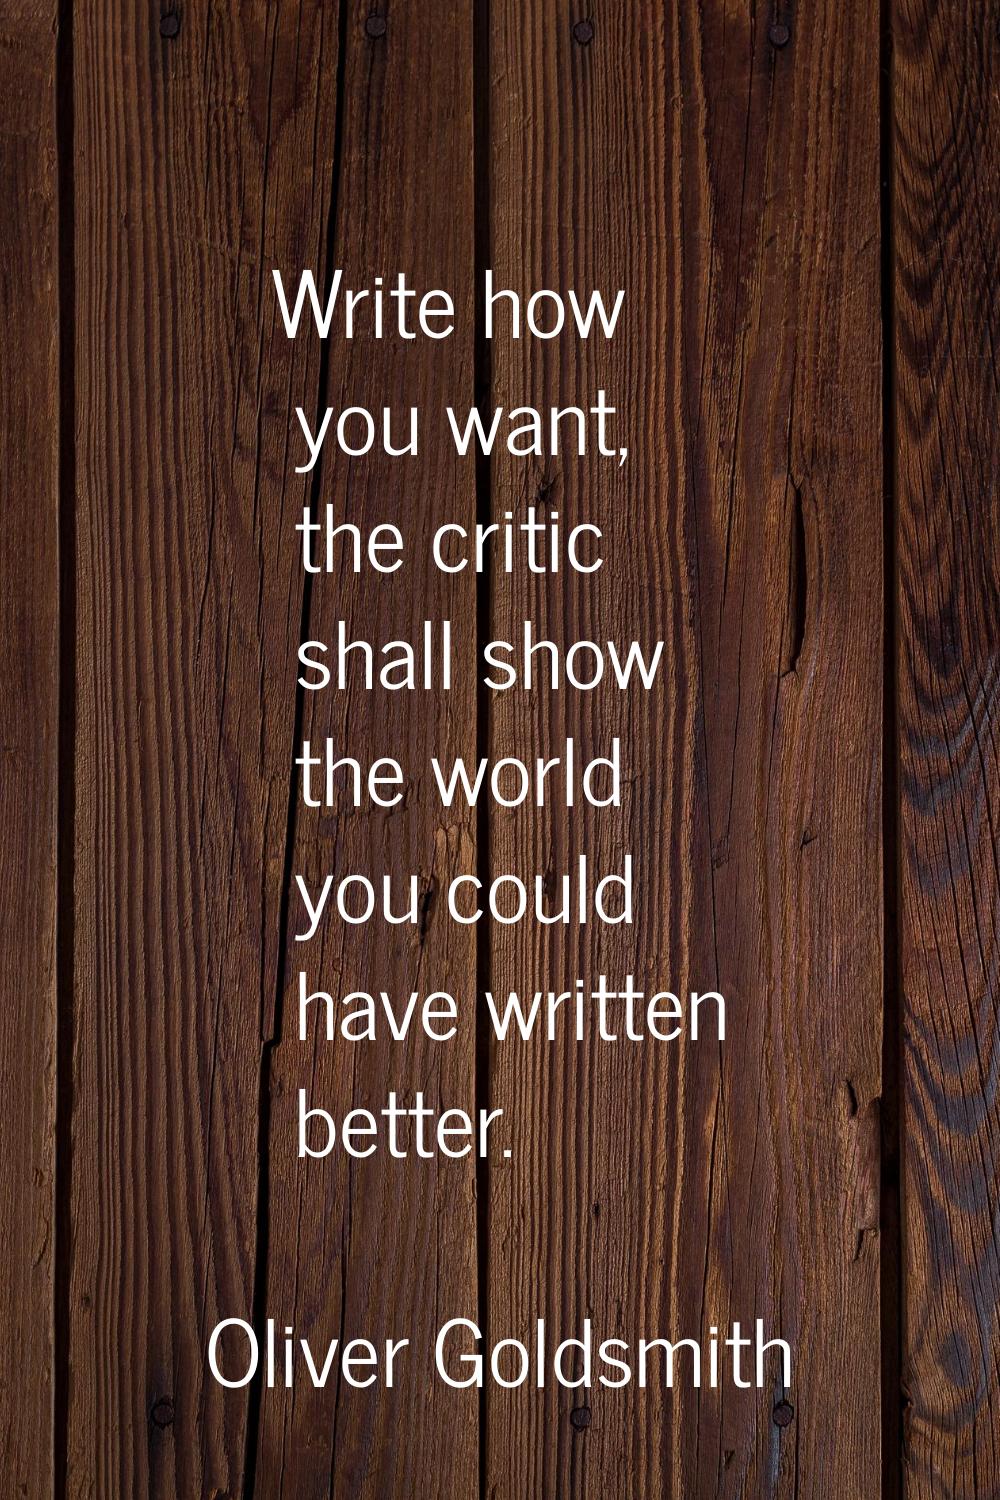 Write how you want, the critic shall show the world you could have written better.